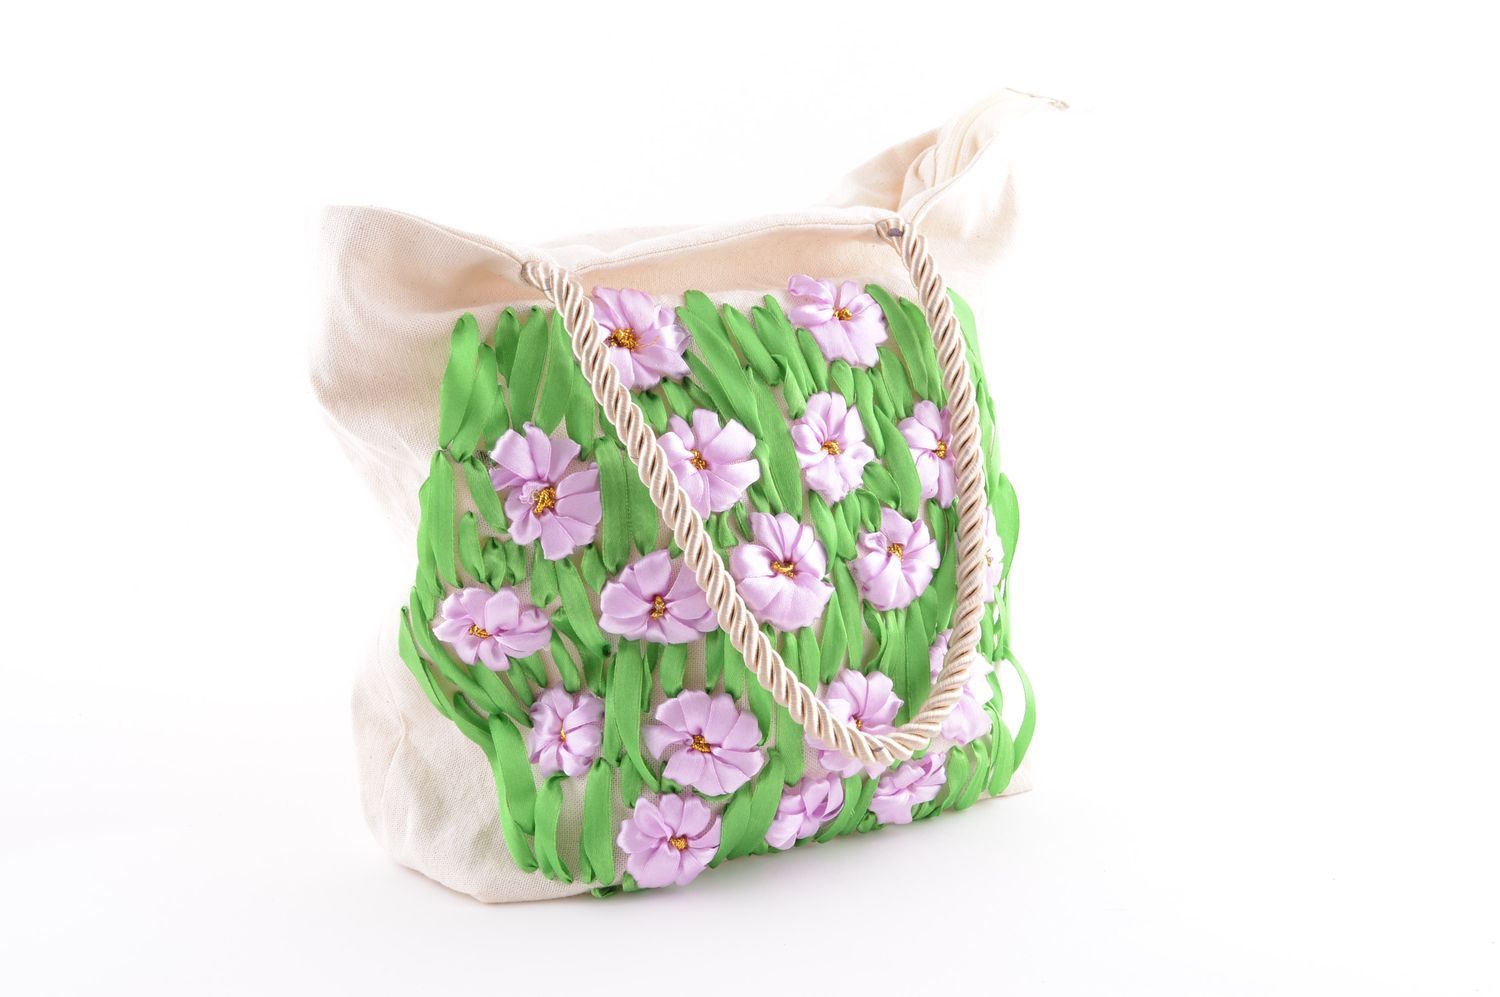 Shoulder bag unusual handmade textile ladys bag with embroidered flowers photo 1